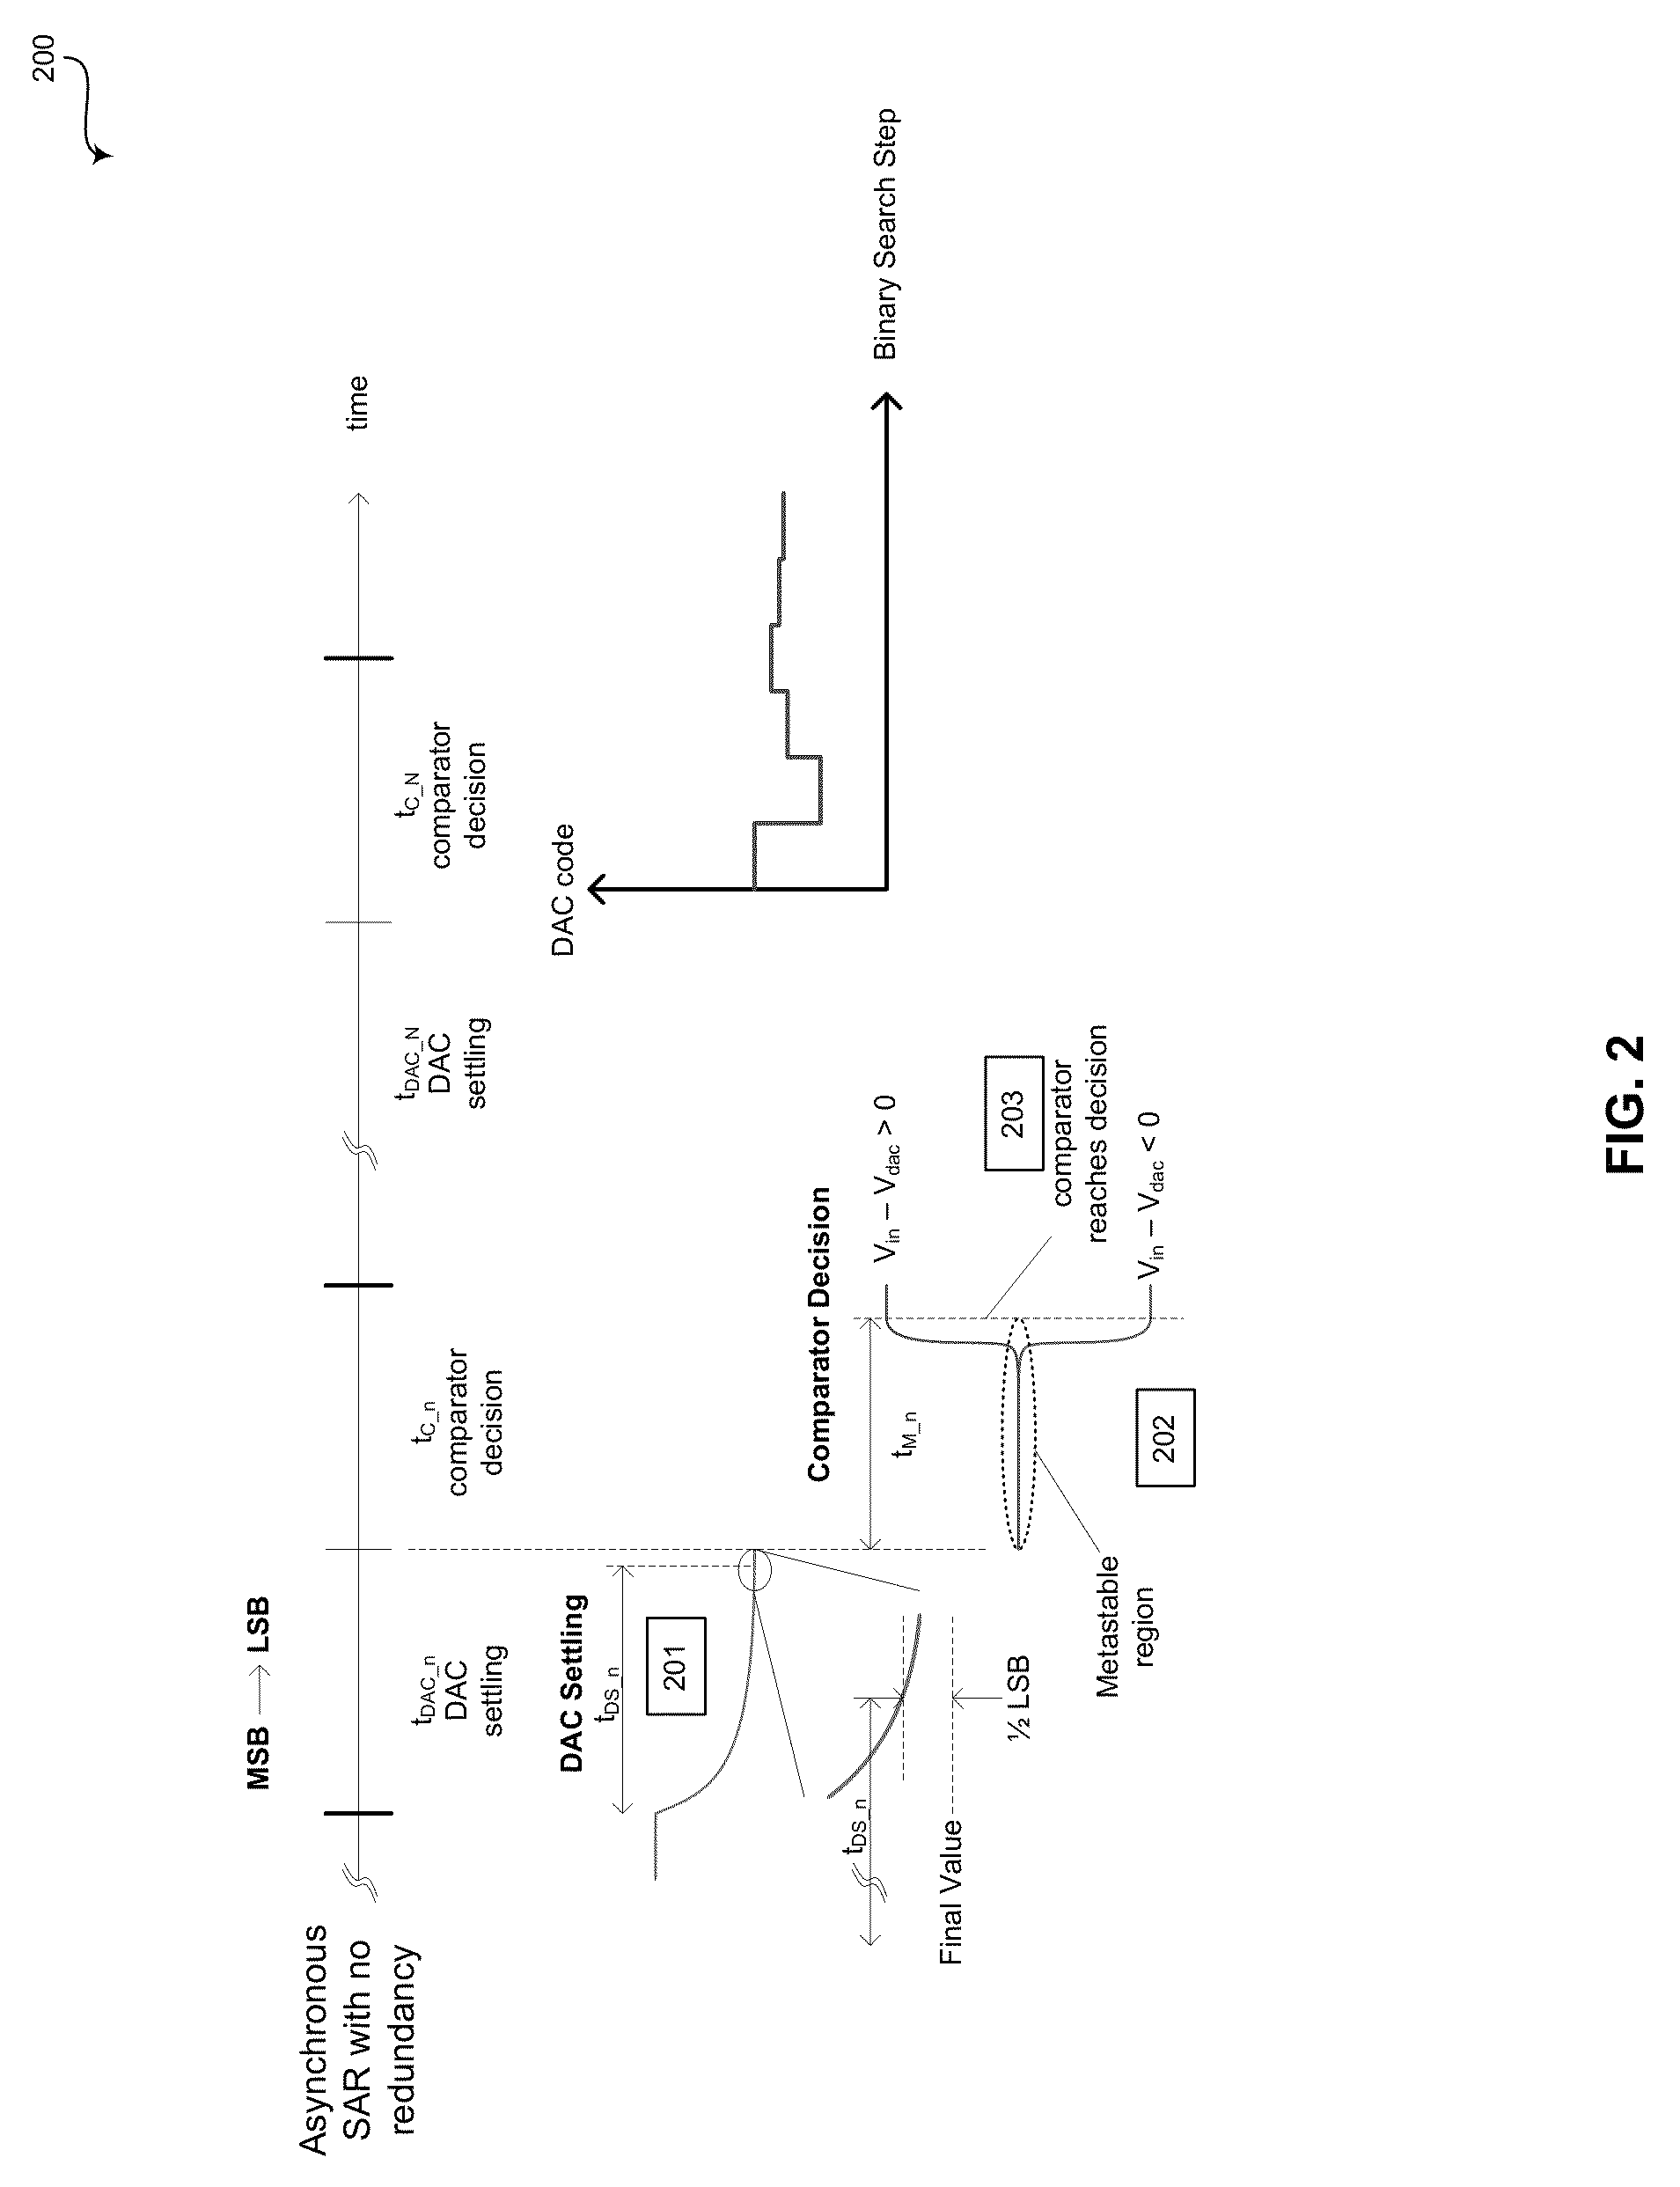 Method and system for asynchronous successive approximation register (SAR) analog-to-digital converters (ADCs)